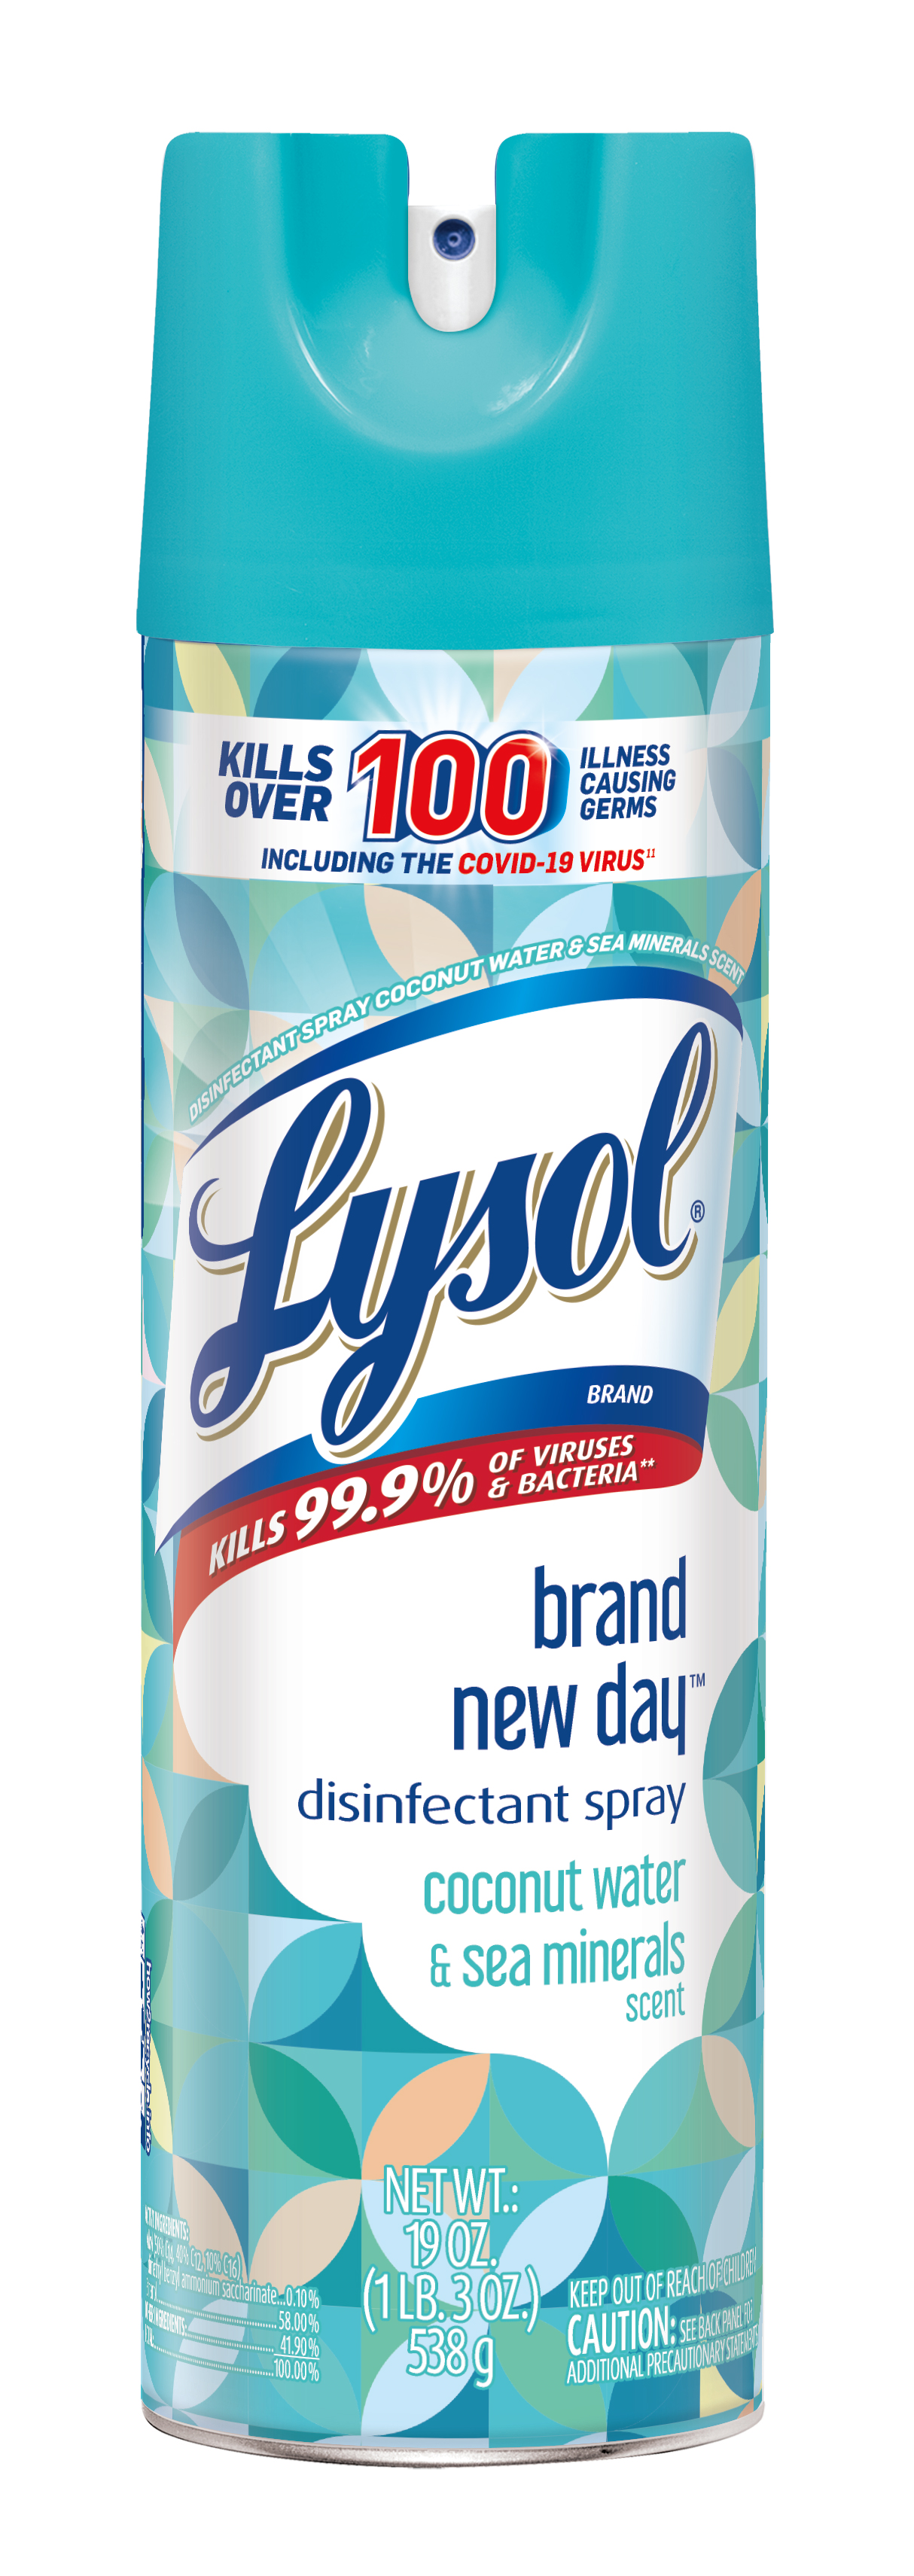 LYSOL Disinfectant Spray  Brand New Day Coconut Water  Sea Minerals